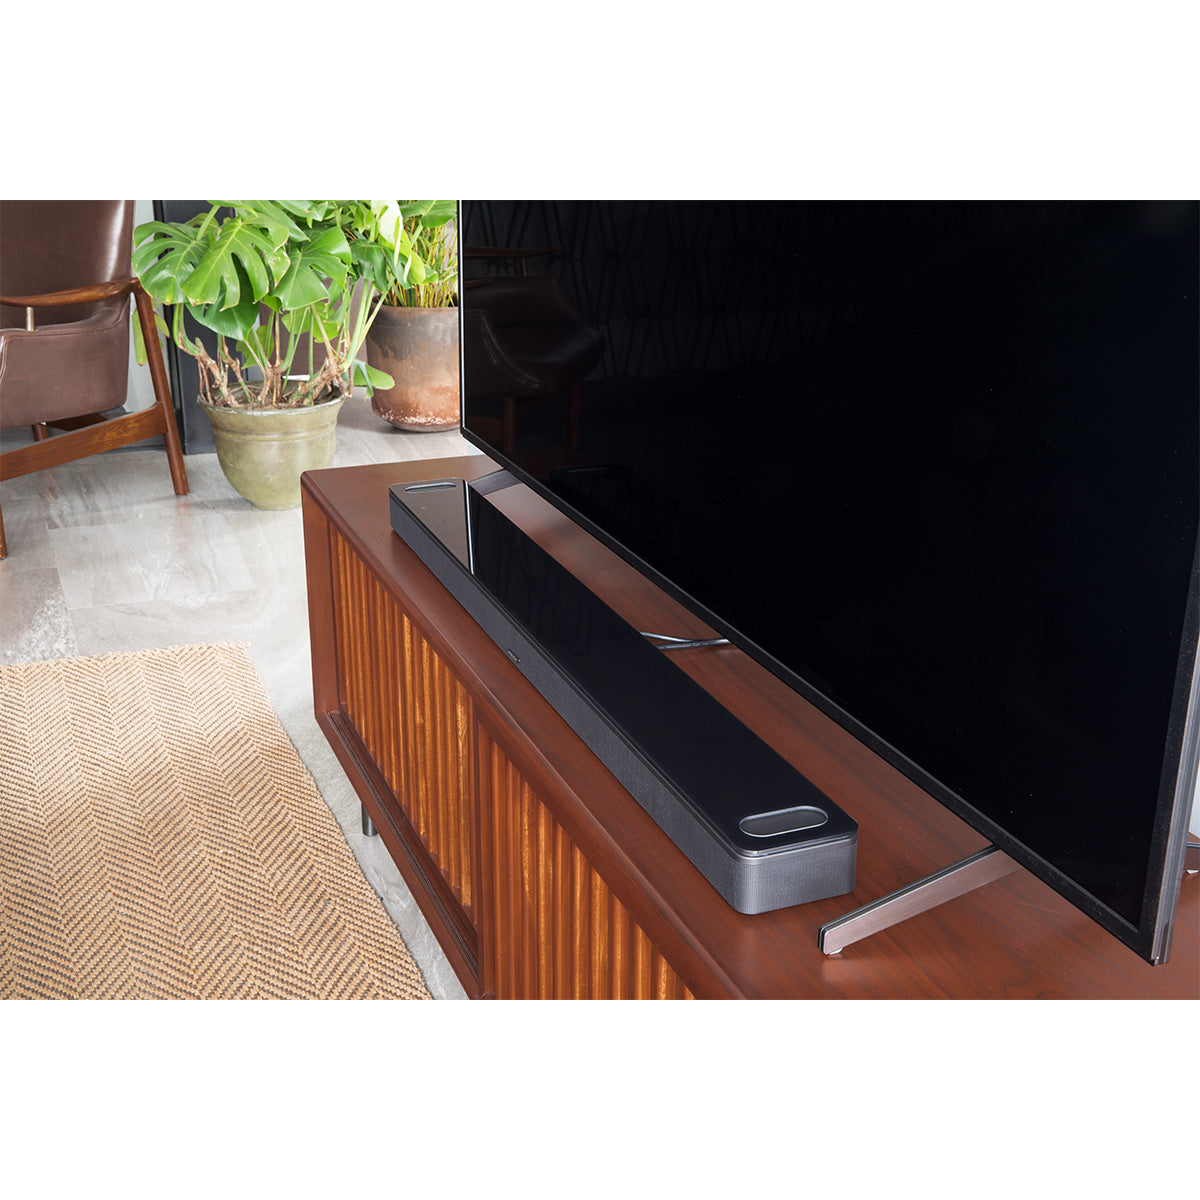 Bose Soundbar 900 Home Theater System with Bass Module 700 Subwoofer (Black)